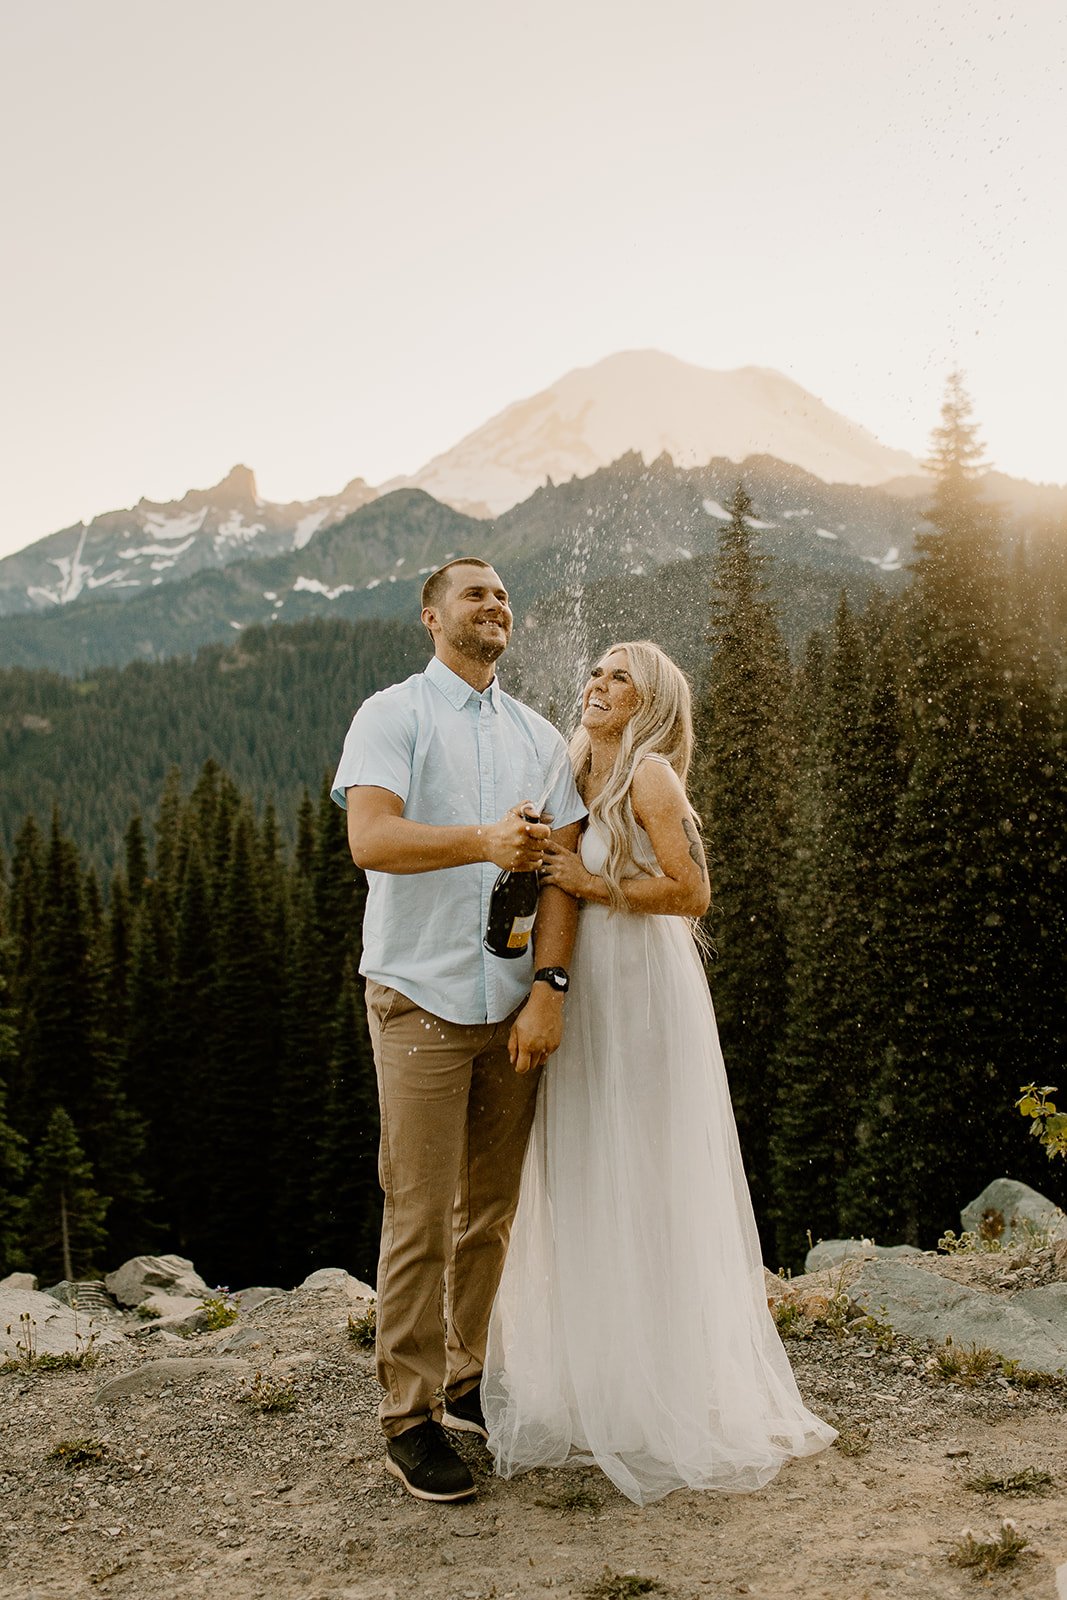 newly engaged couple spray champagne during their engagement session in mt rainier np